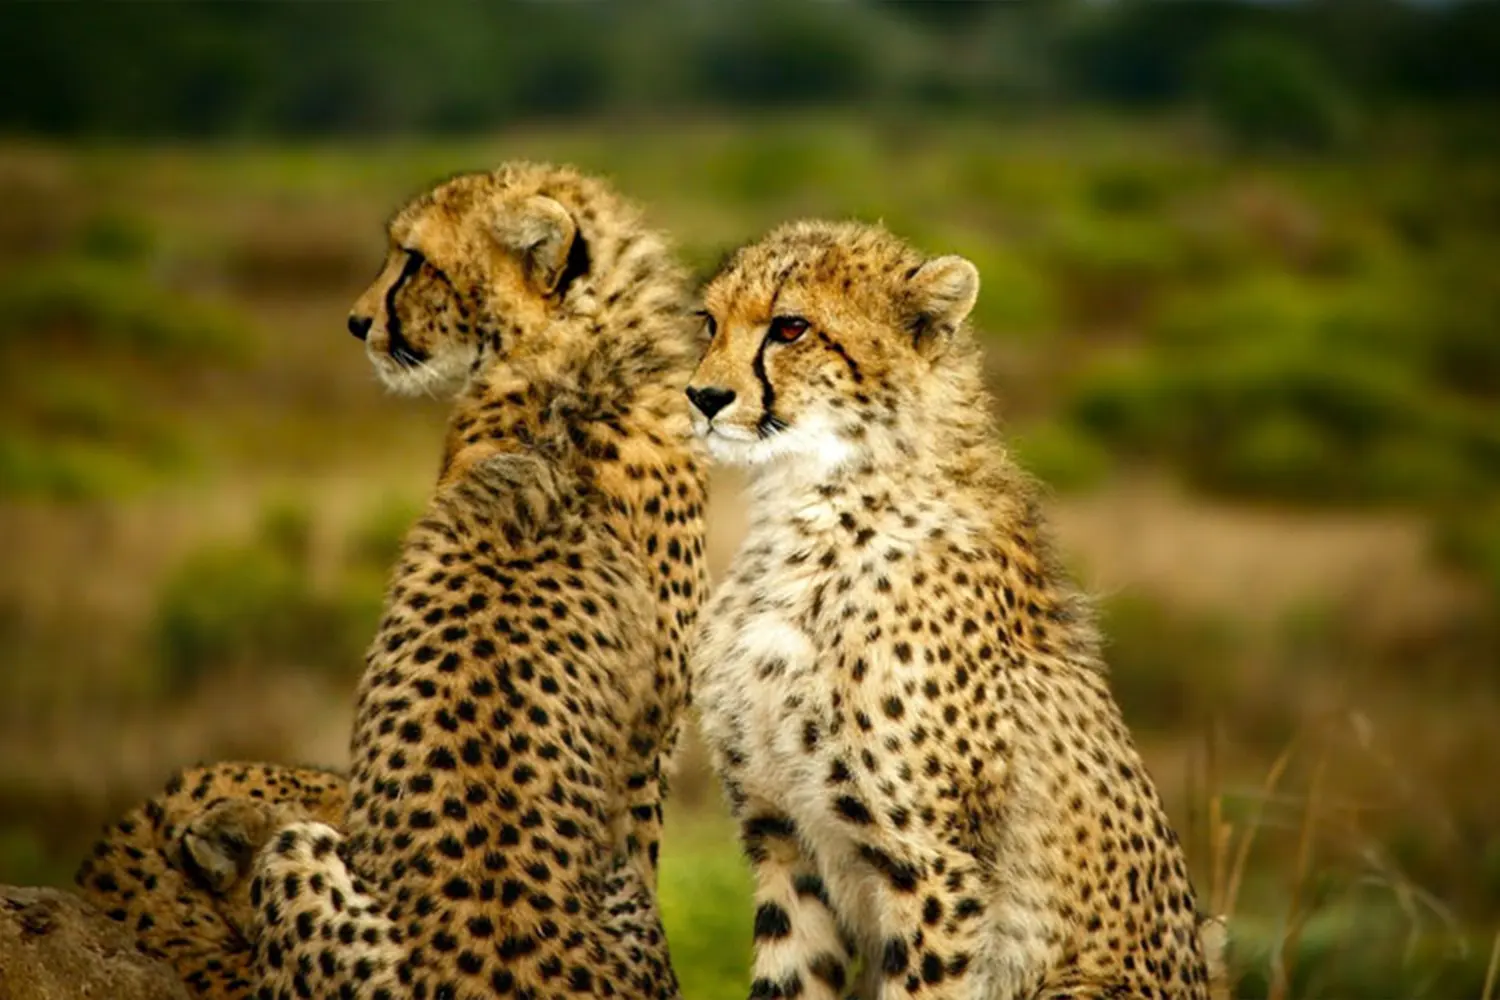 The Best Safari National Parks in Tanzania